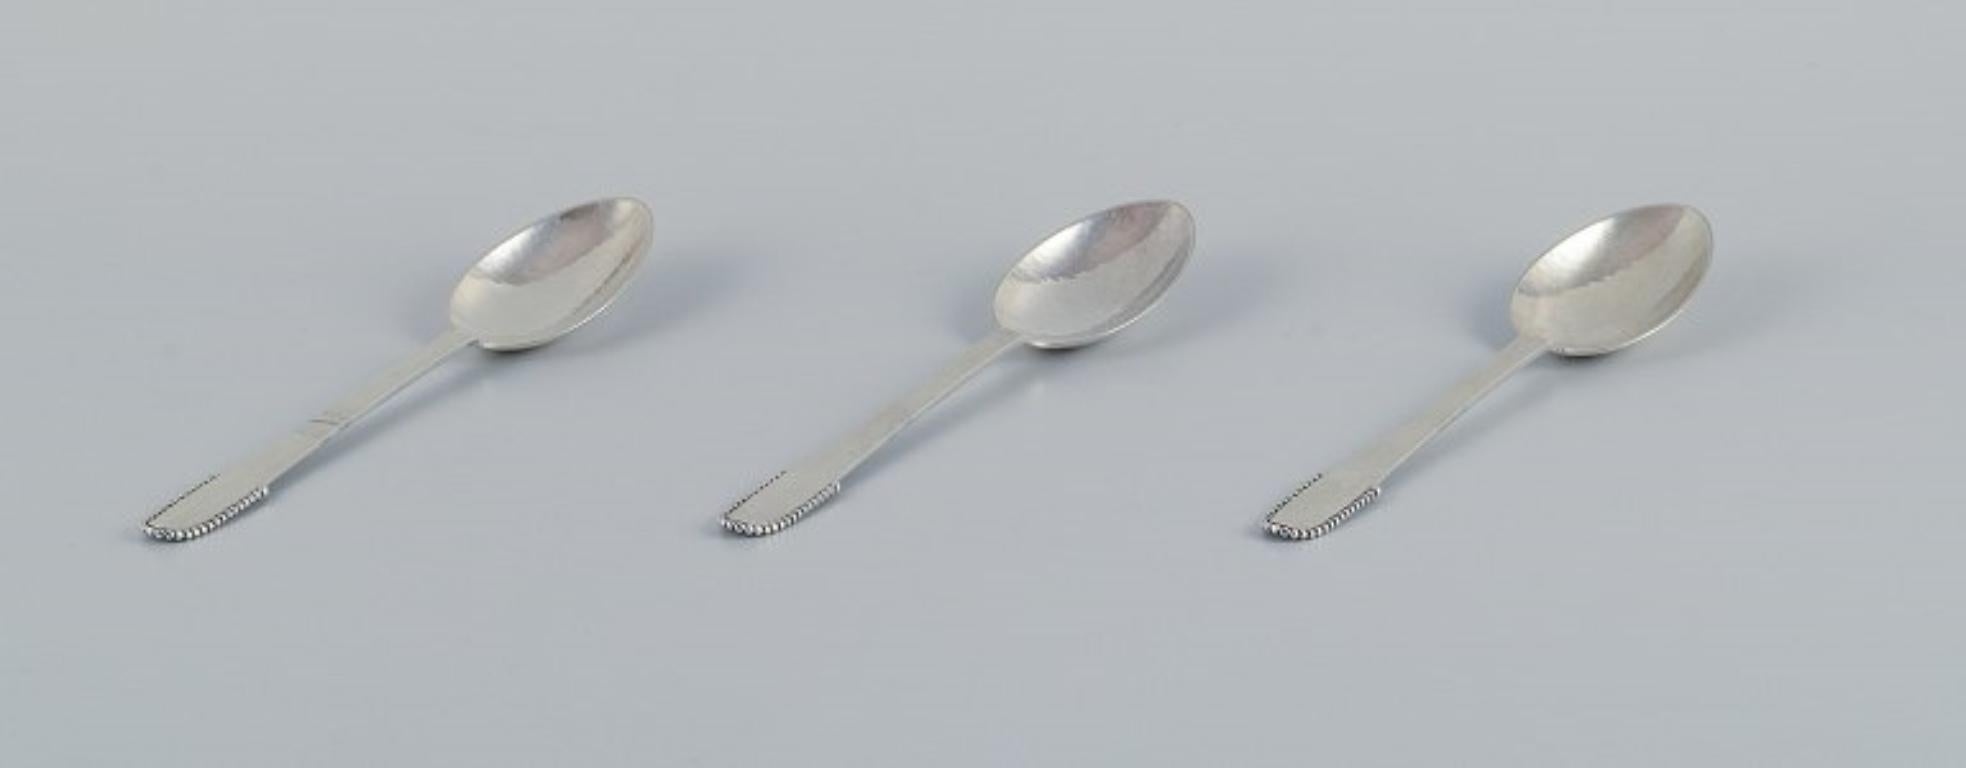 Georg Jensen Beaded.
Three dinner spoons in sterling silver.
After 1944 hallmark.
In excellent condition.
Dimensions: L 18.5 cm.